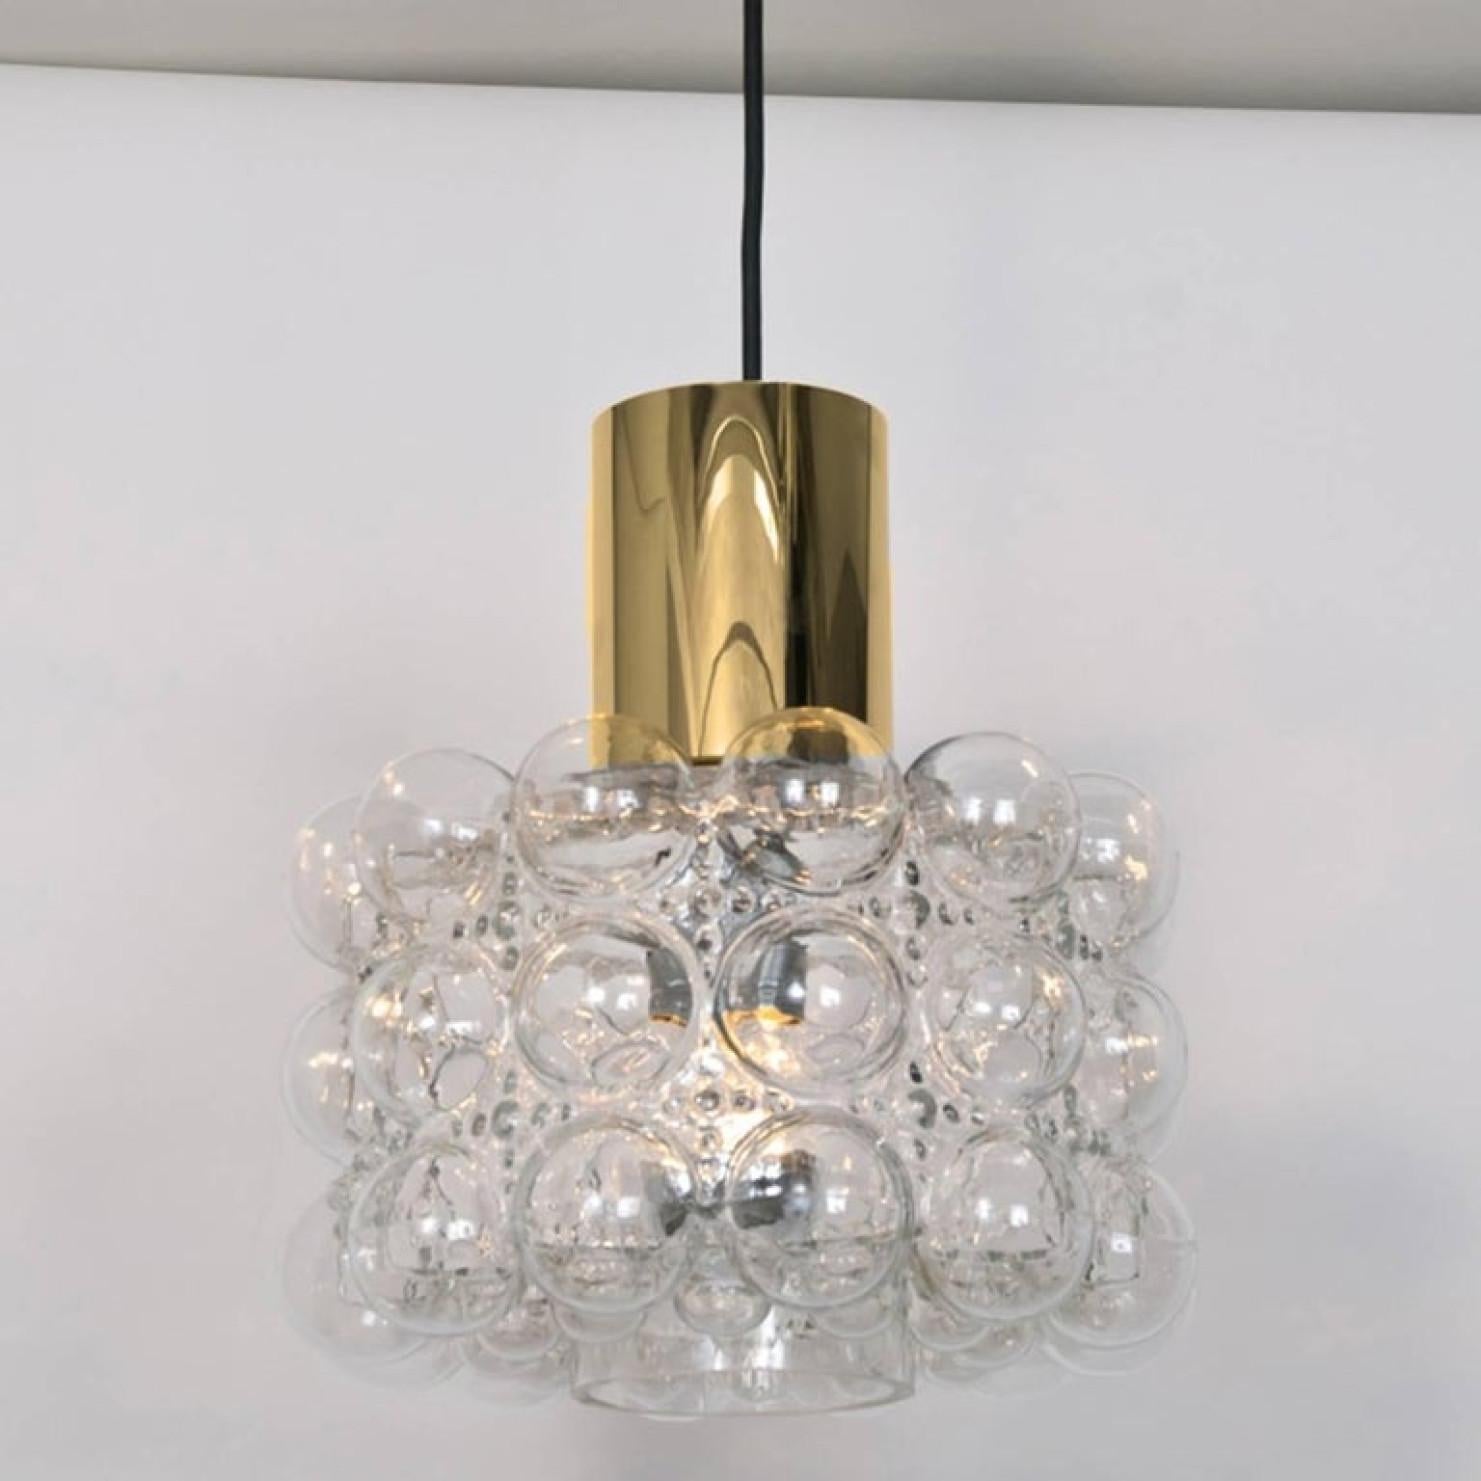 Pressed One of the Three Beautiful Bubble Glass Pendant Lamps by Helena Tynell, 1960 For Sale